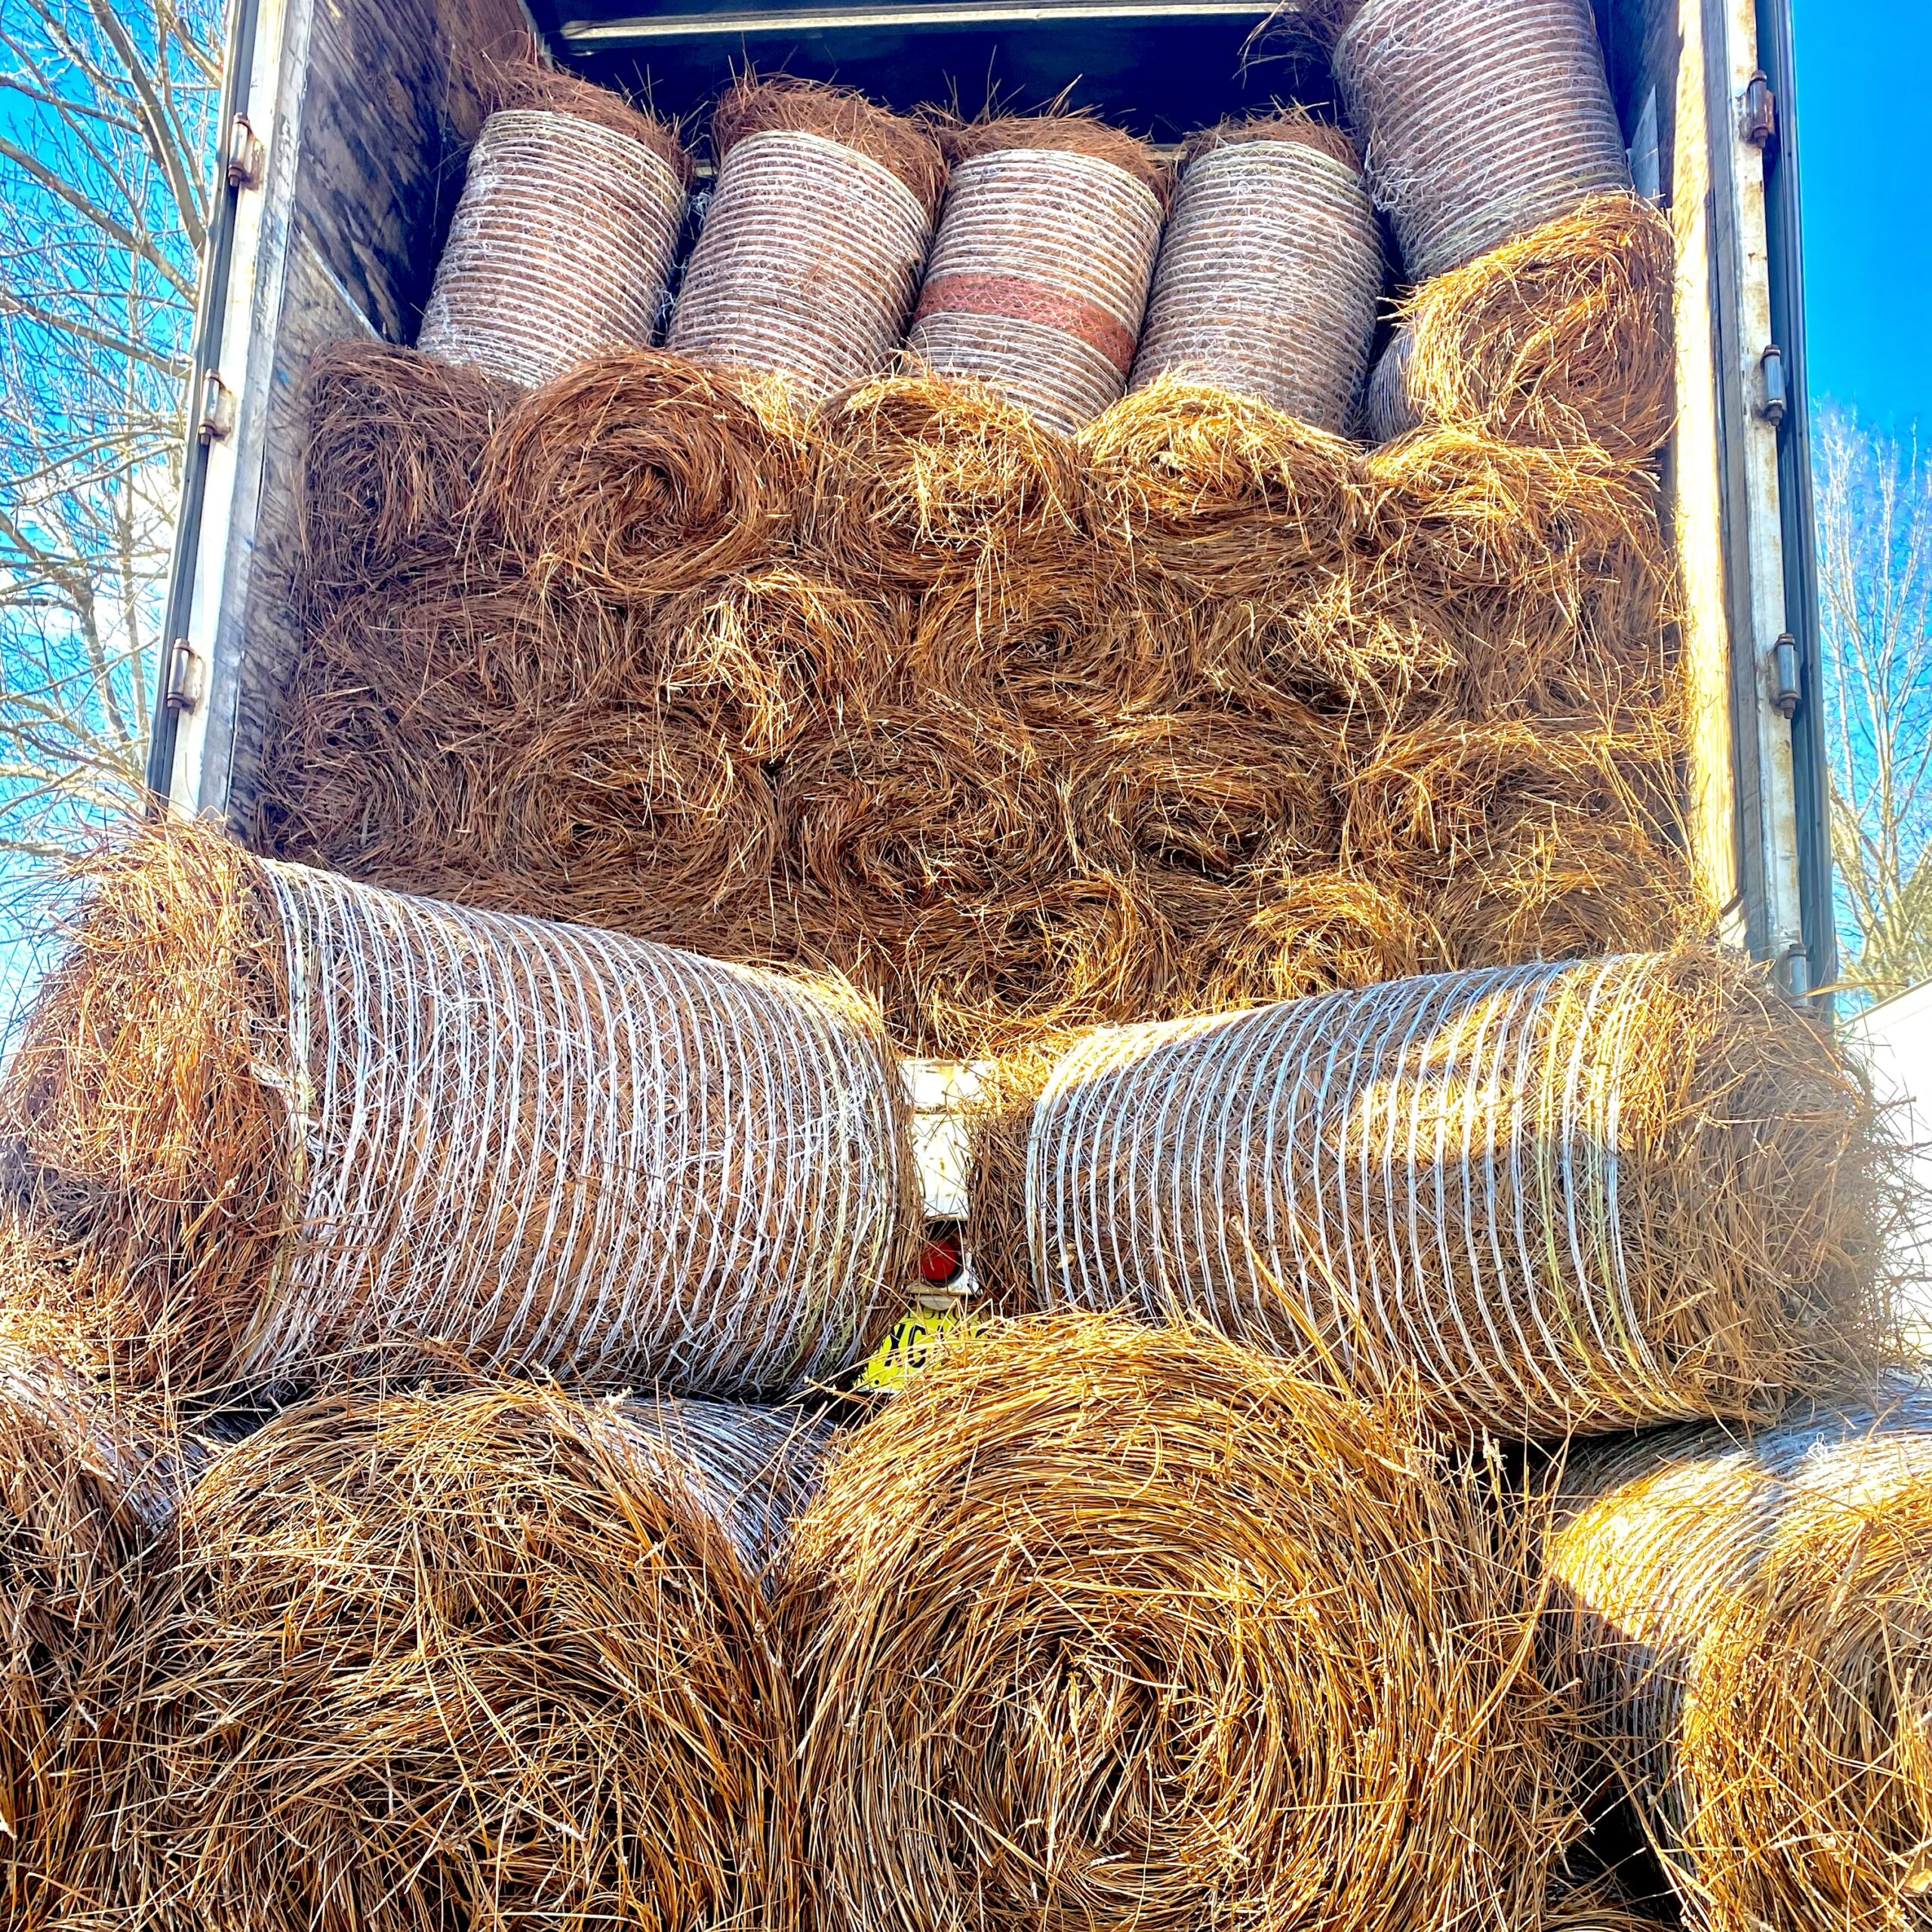  Long Needle Pine Straw Rolls Loaded in Trailer - Pine Straw King Delivery